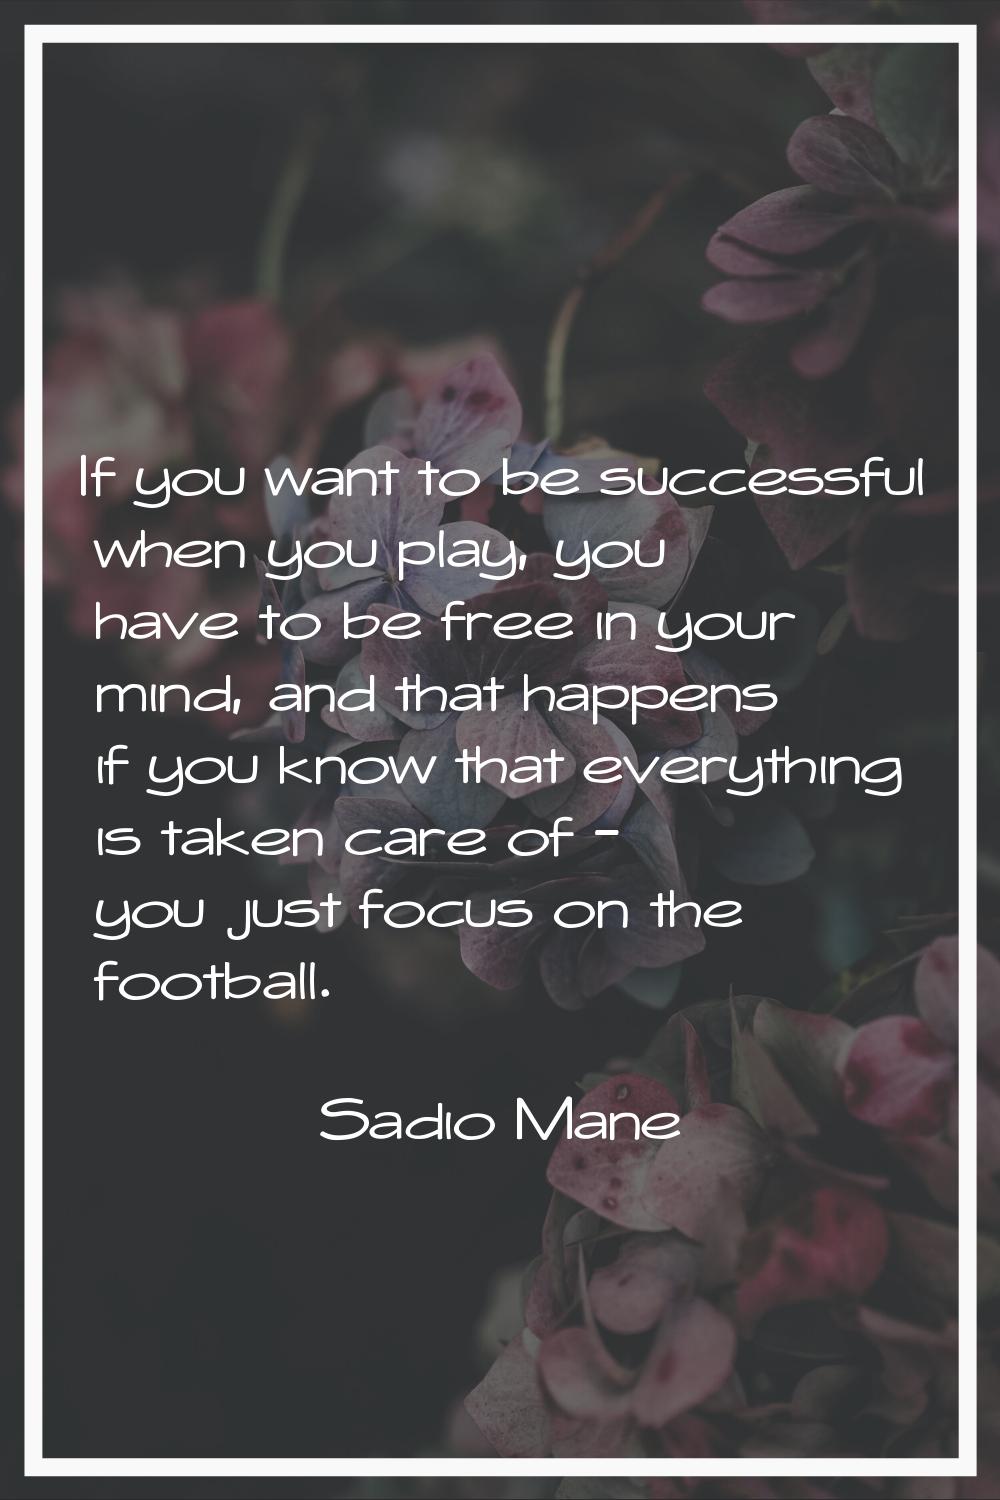 If you want to be successful when you play, you have to be free in your mind, and that happens if y